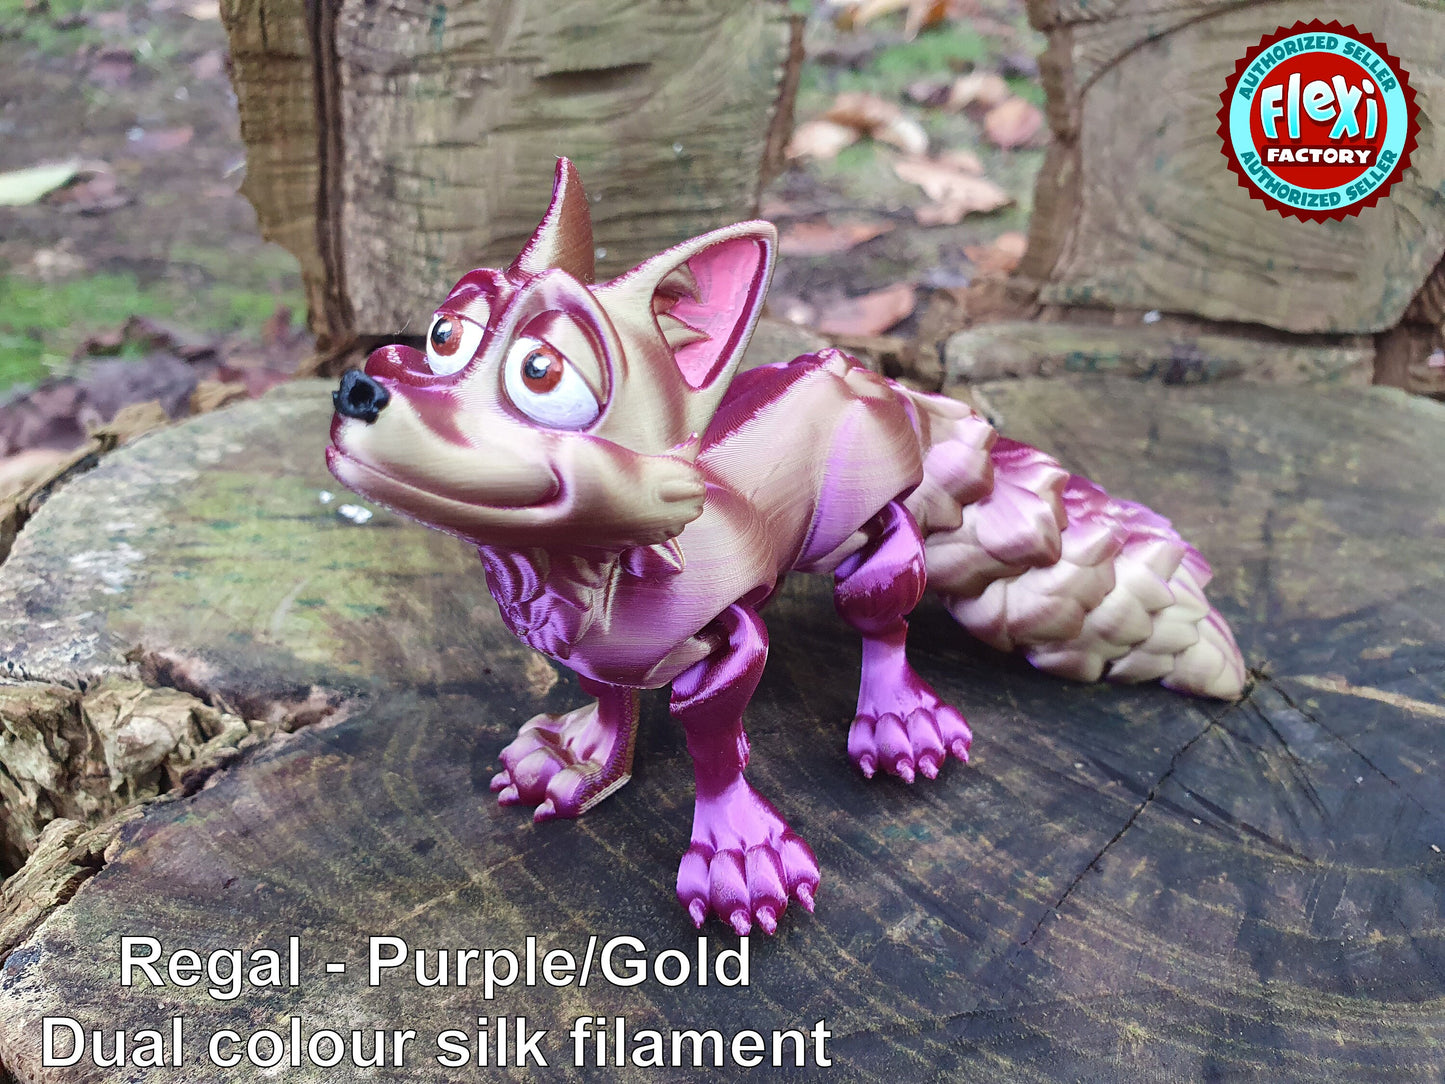 Cute Flexi Fox -  Articulated Flexible 3D Print. Professionally Hand painted finishing details